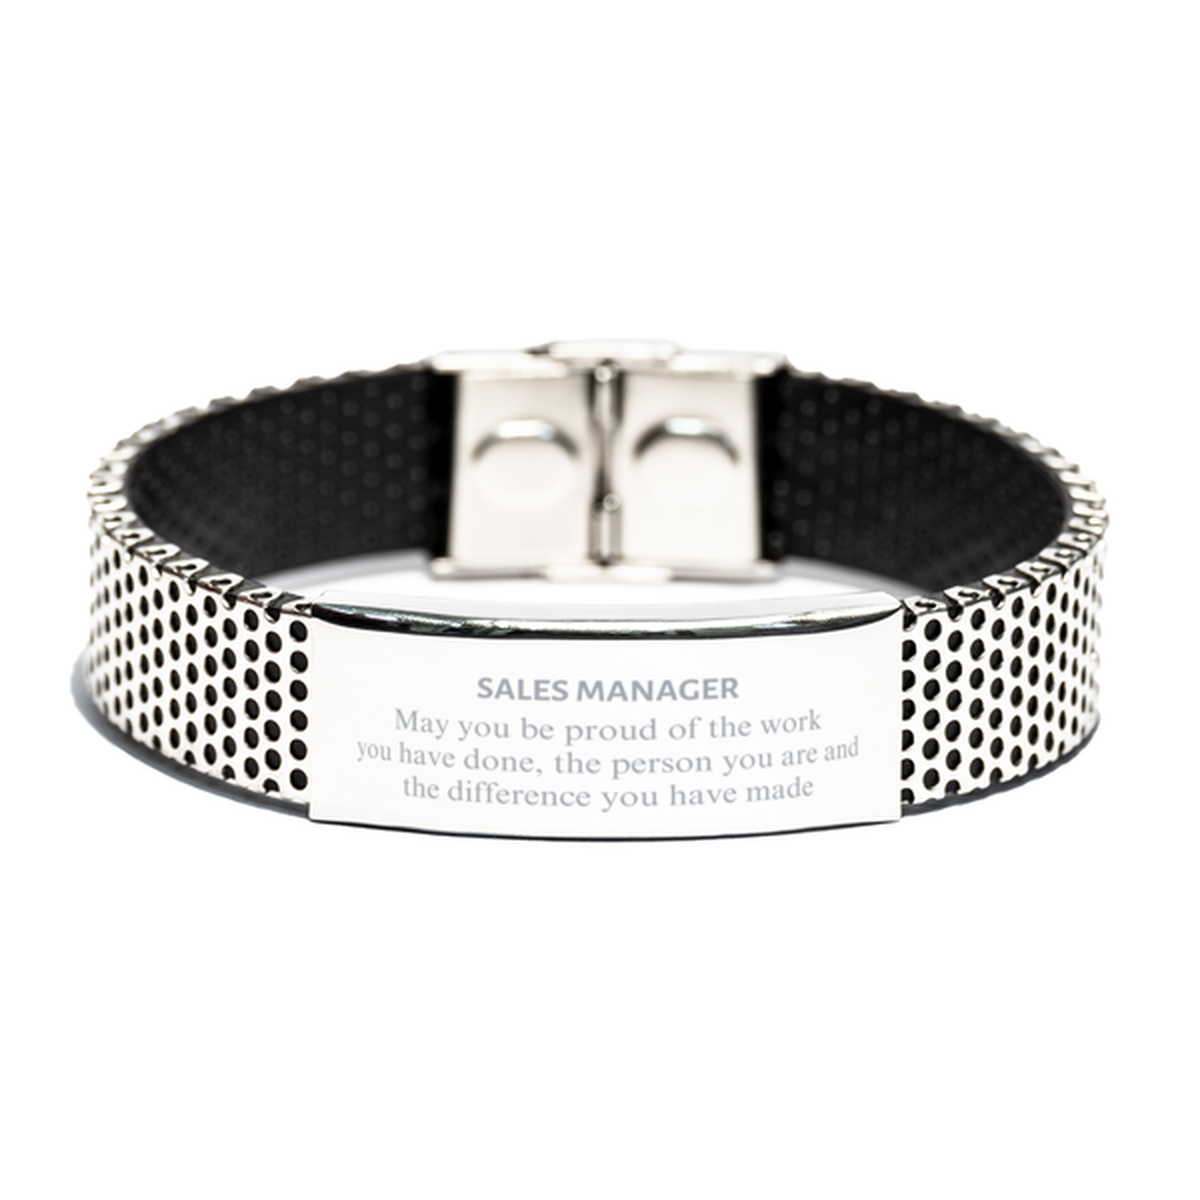 Sales Manager May you be proud of the work you have done, Retirement Sales Manager Stainless Steel Bracelet for Colleague Appreciation Gifts Amazing for Sales Manager